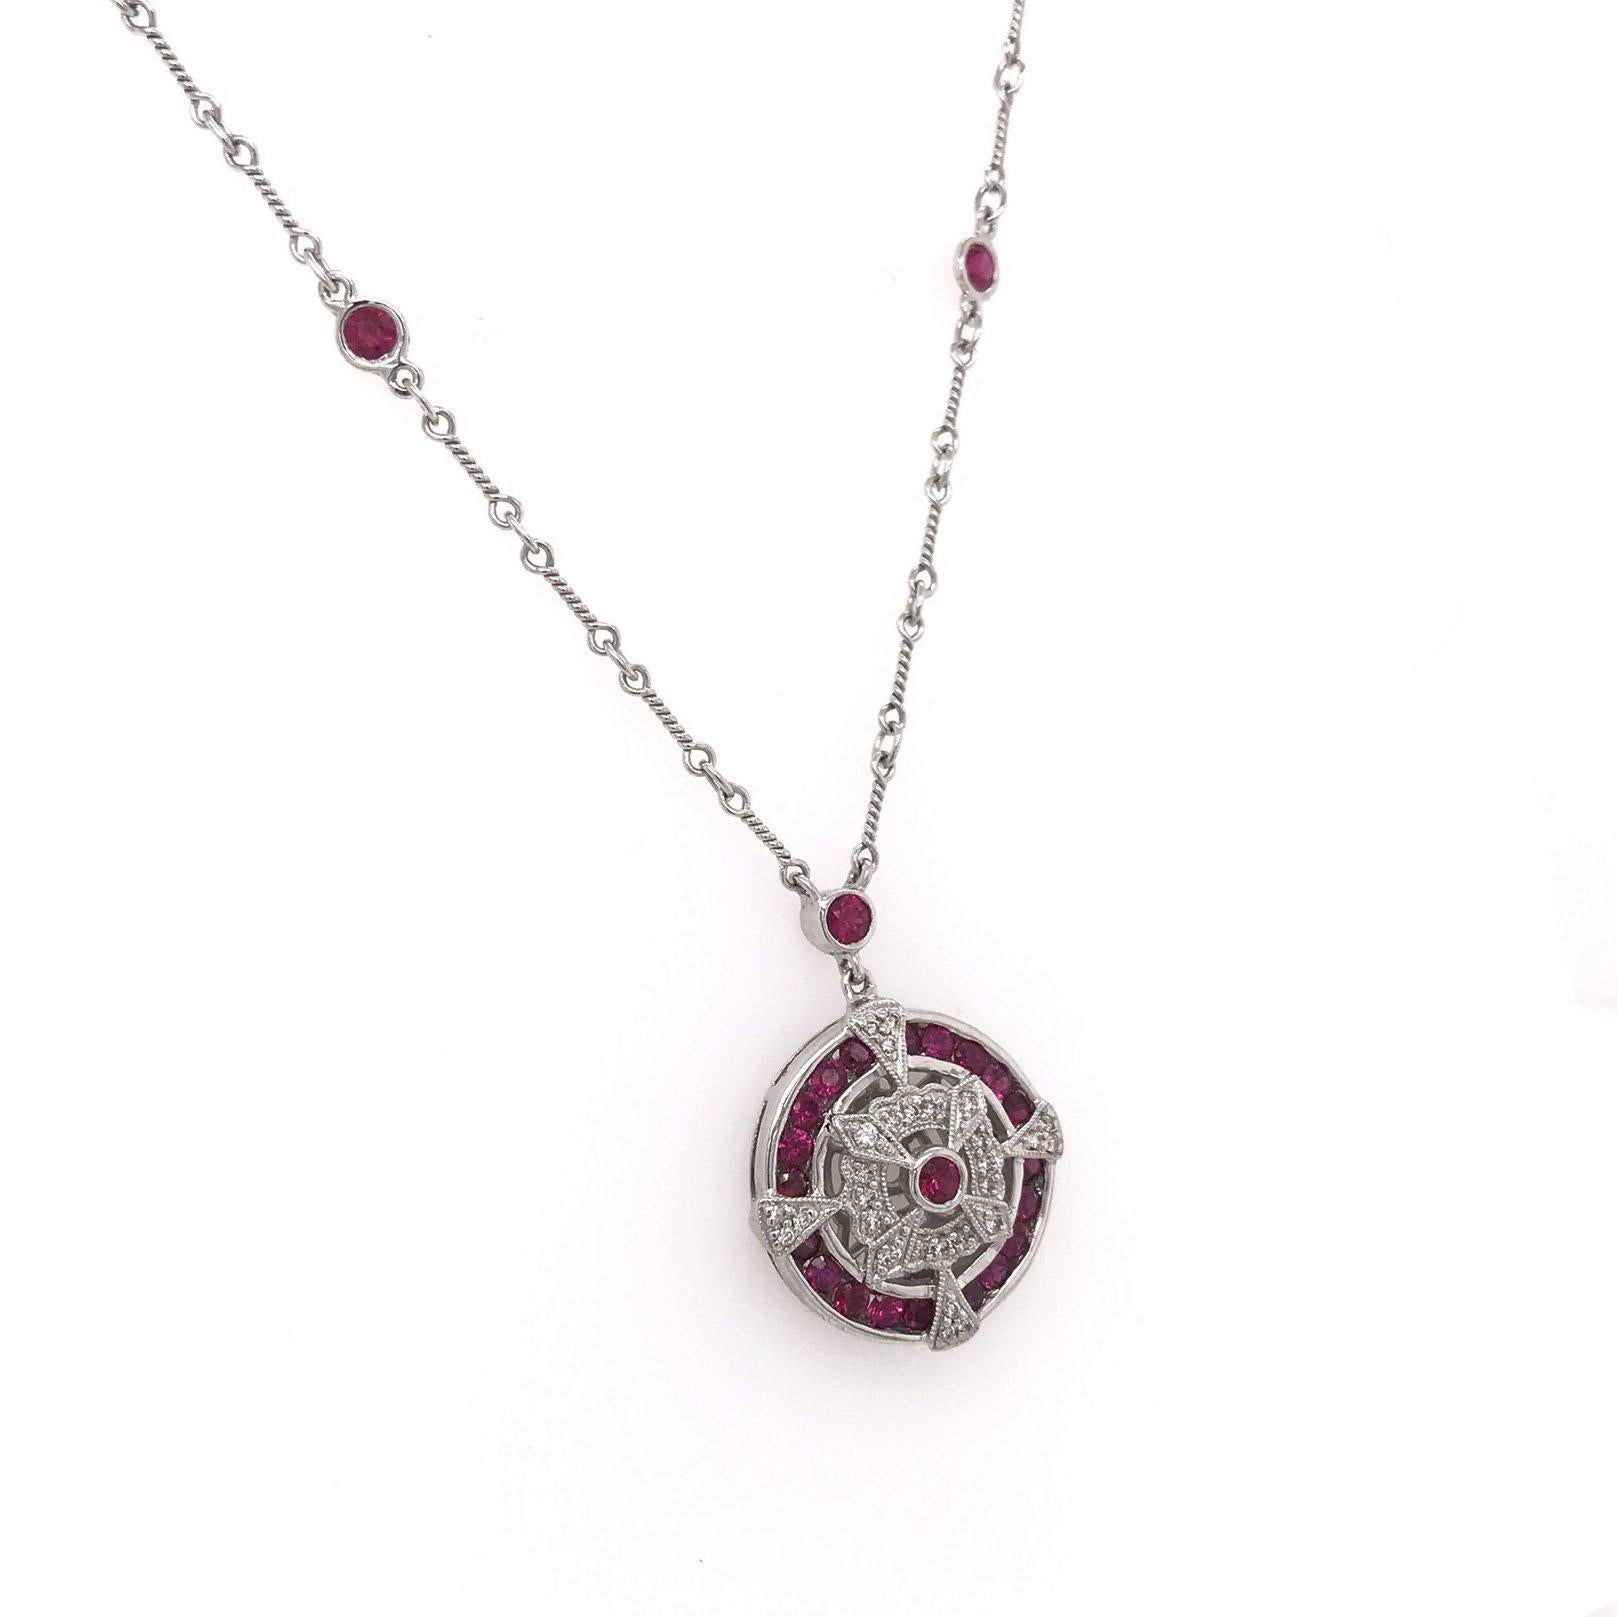 This is a contemporary piece, new and never worn. This stunning diamond and ruby necklace features 36 tiny sparkling diamond accents as well as 24 vibrant red ruby accents. The setting is 14K white gold and features contemporary filigree as well as